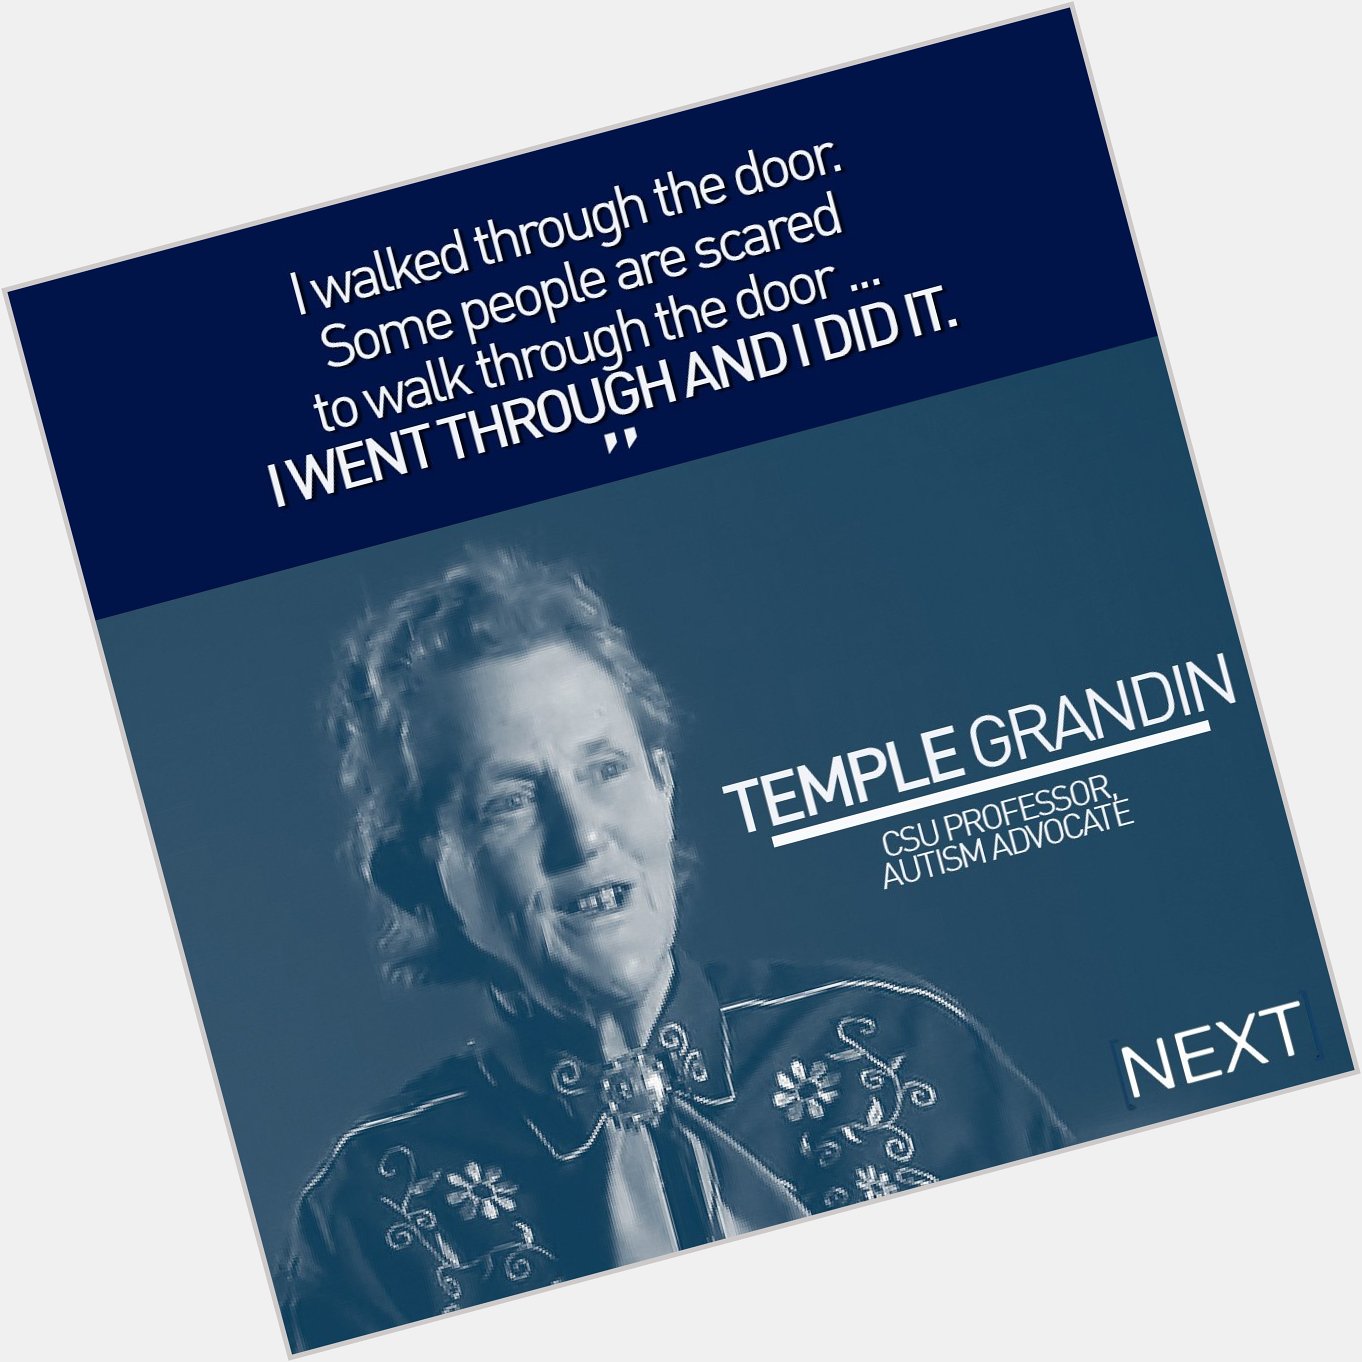 Happy 70th birthday to Temple Grandin, our favorite person to interview so far on Next:  